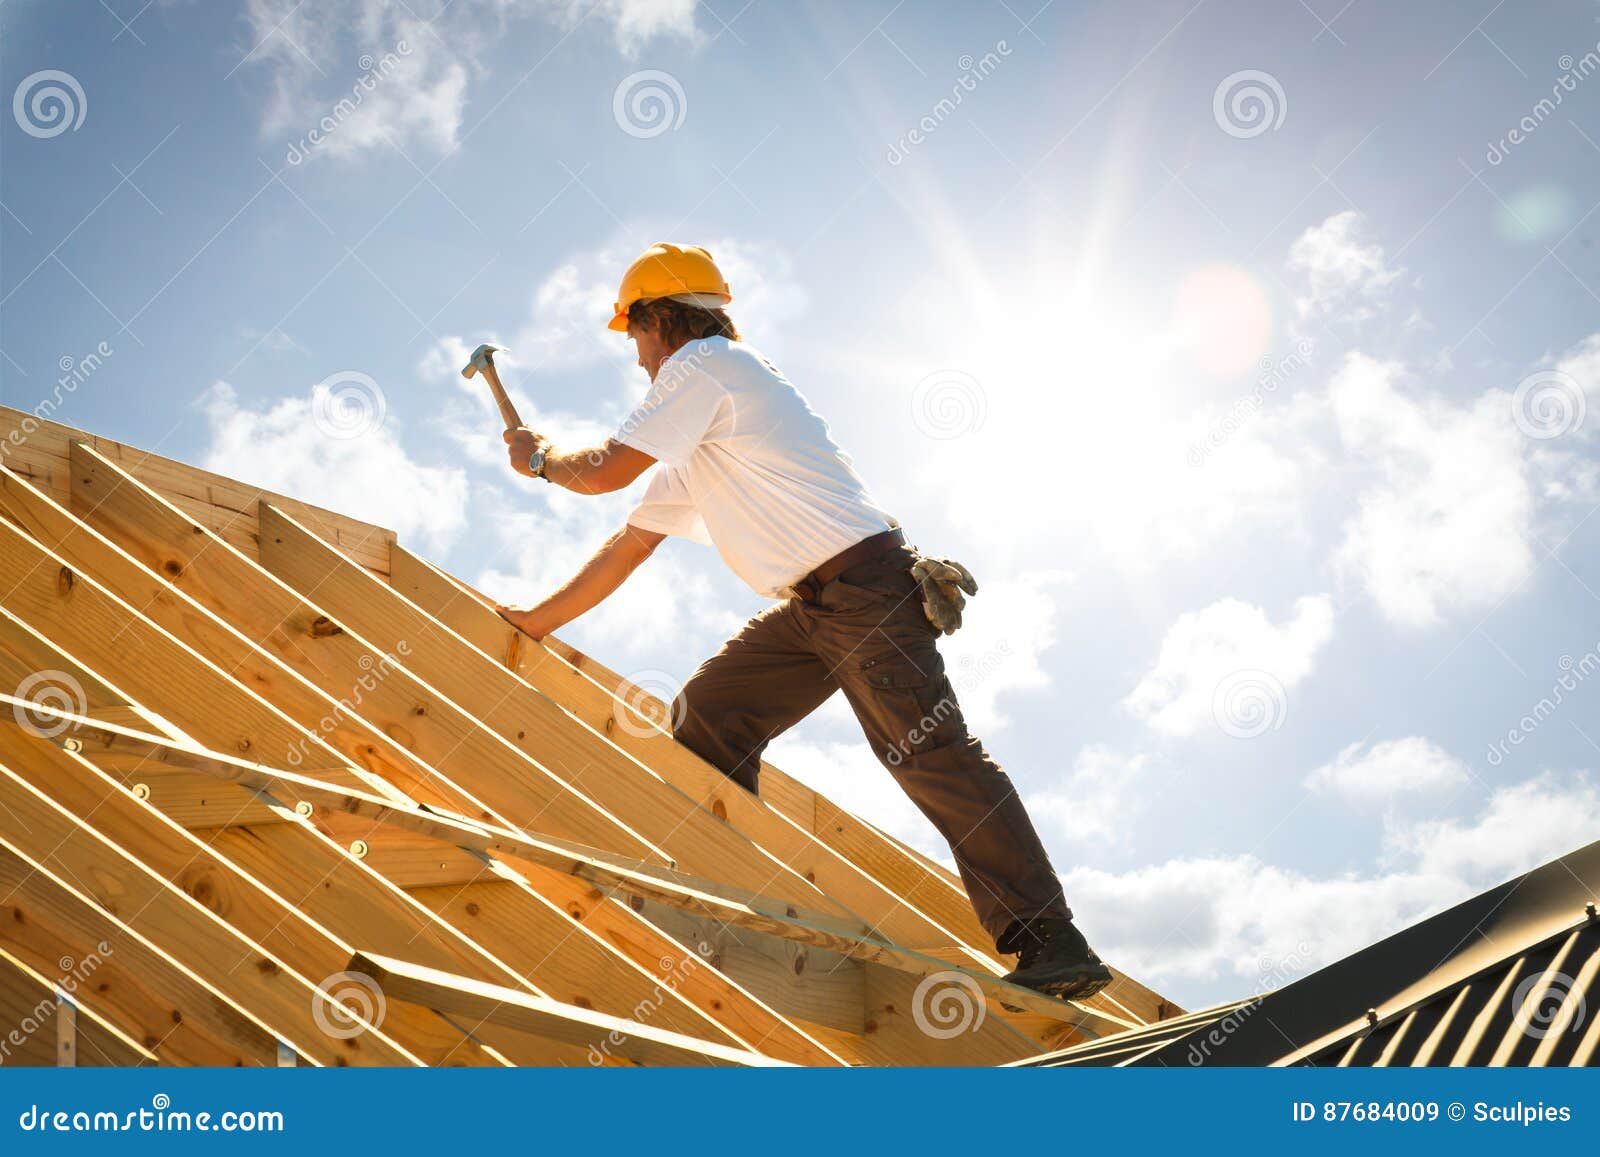 roofer carpenter working on roof on construction site